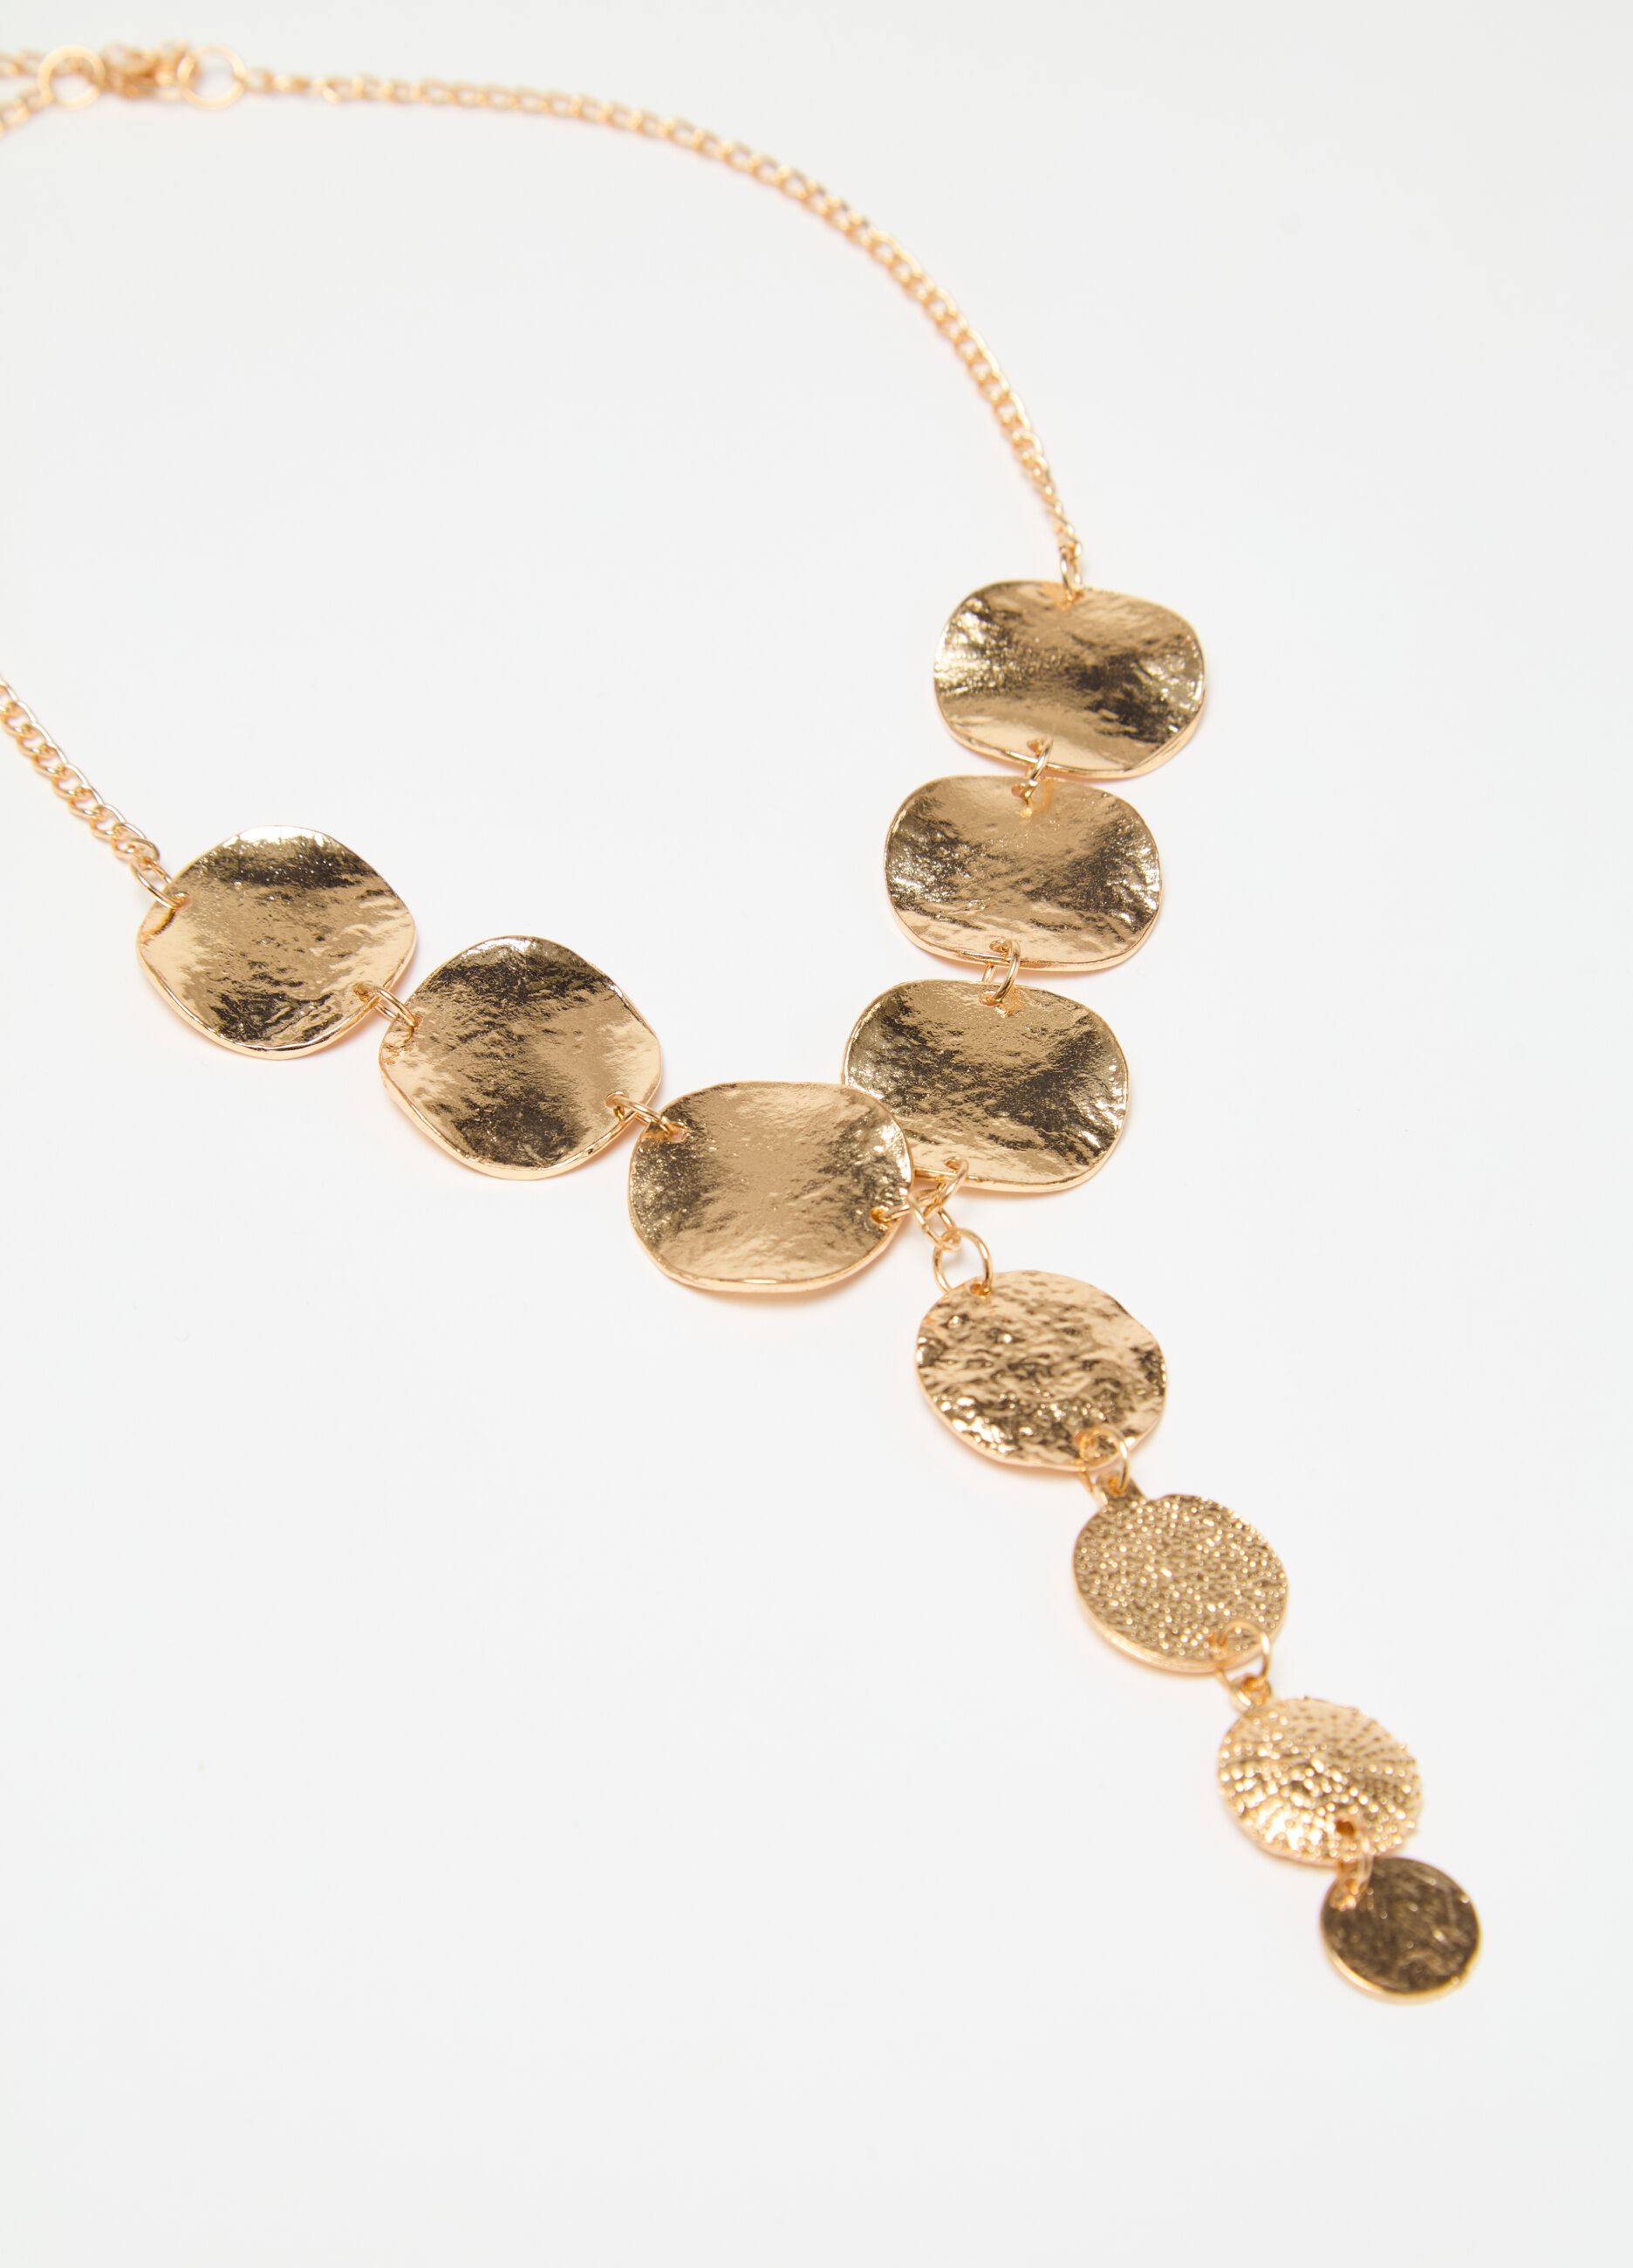 Long necklace with medallions